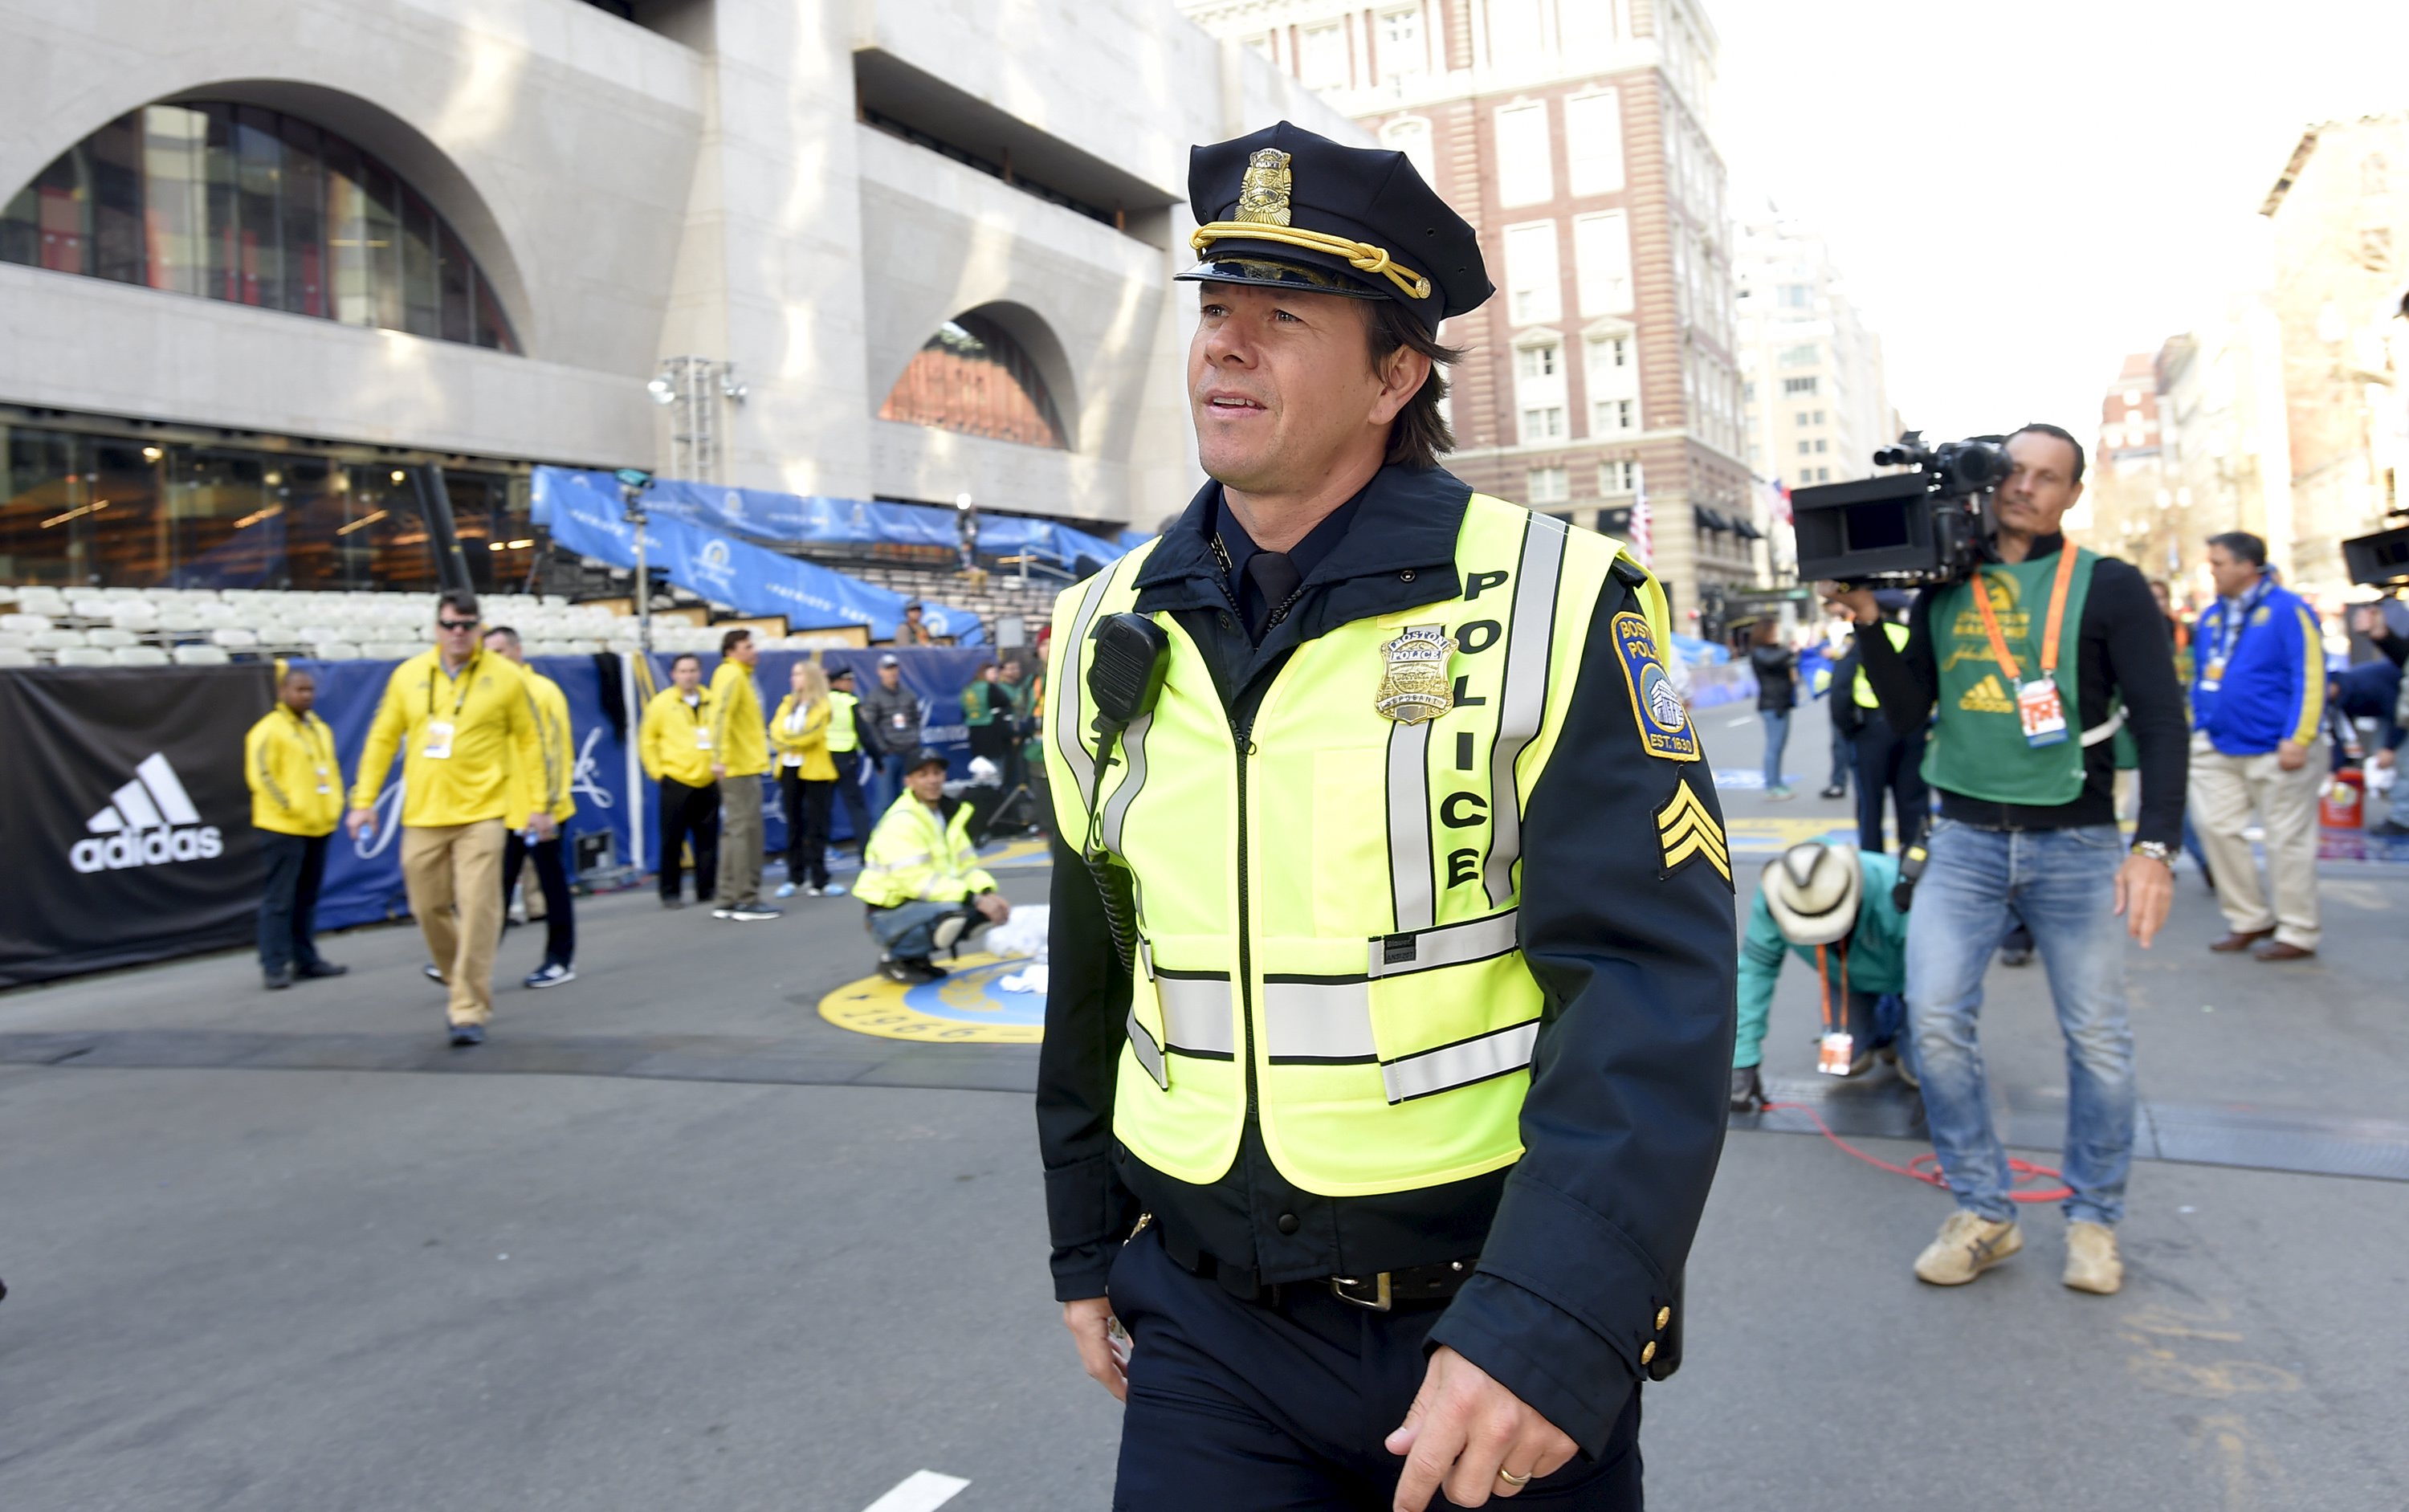 Actor Mark Wahlberg in the role of a Boston police officer prepares to film a scene for the movie "Patriot's Day" at the finish line before the start of the 120th running of the Boston Marathon in Boston